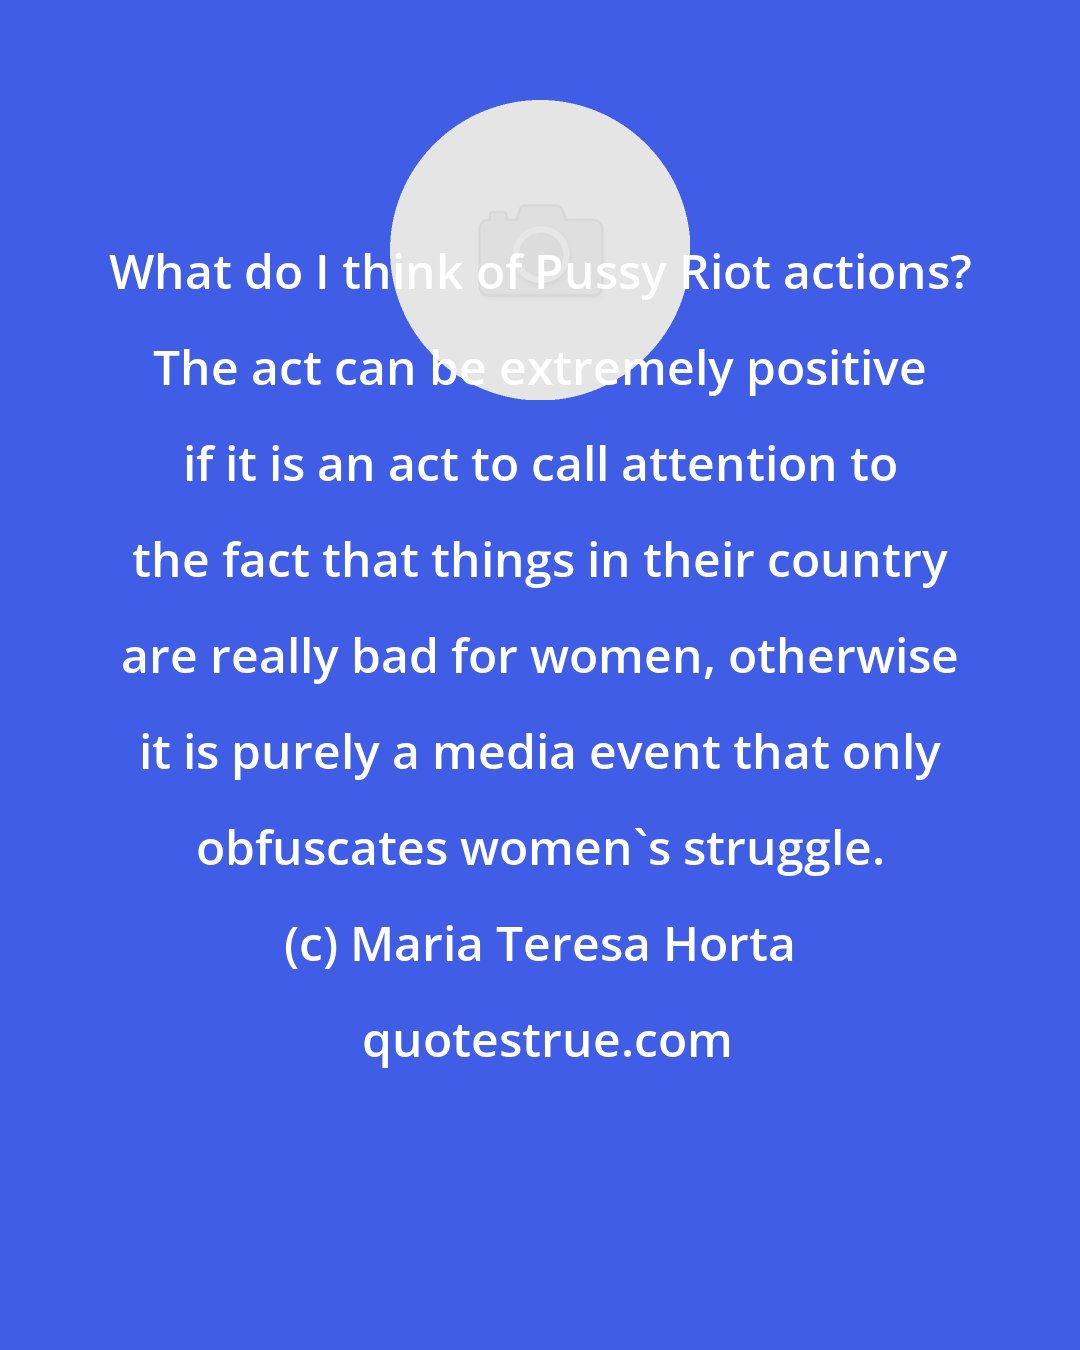 Maria Teresa Horta: What do I think of Pussy Riot actions? The act can be extremely positive if it is an act to call attention to the fact that things in their country are really bad for women, otherwise it is purely a media event that only obfuscates women's struggle.